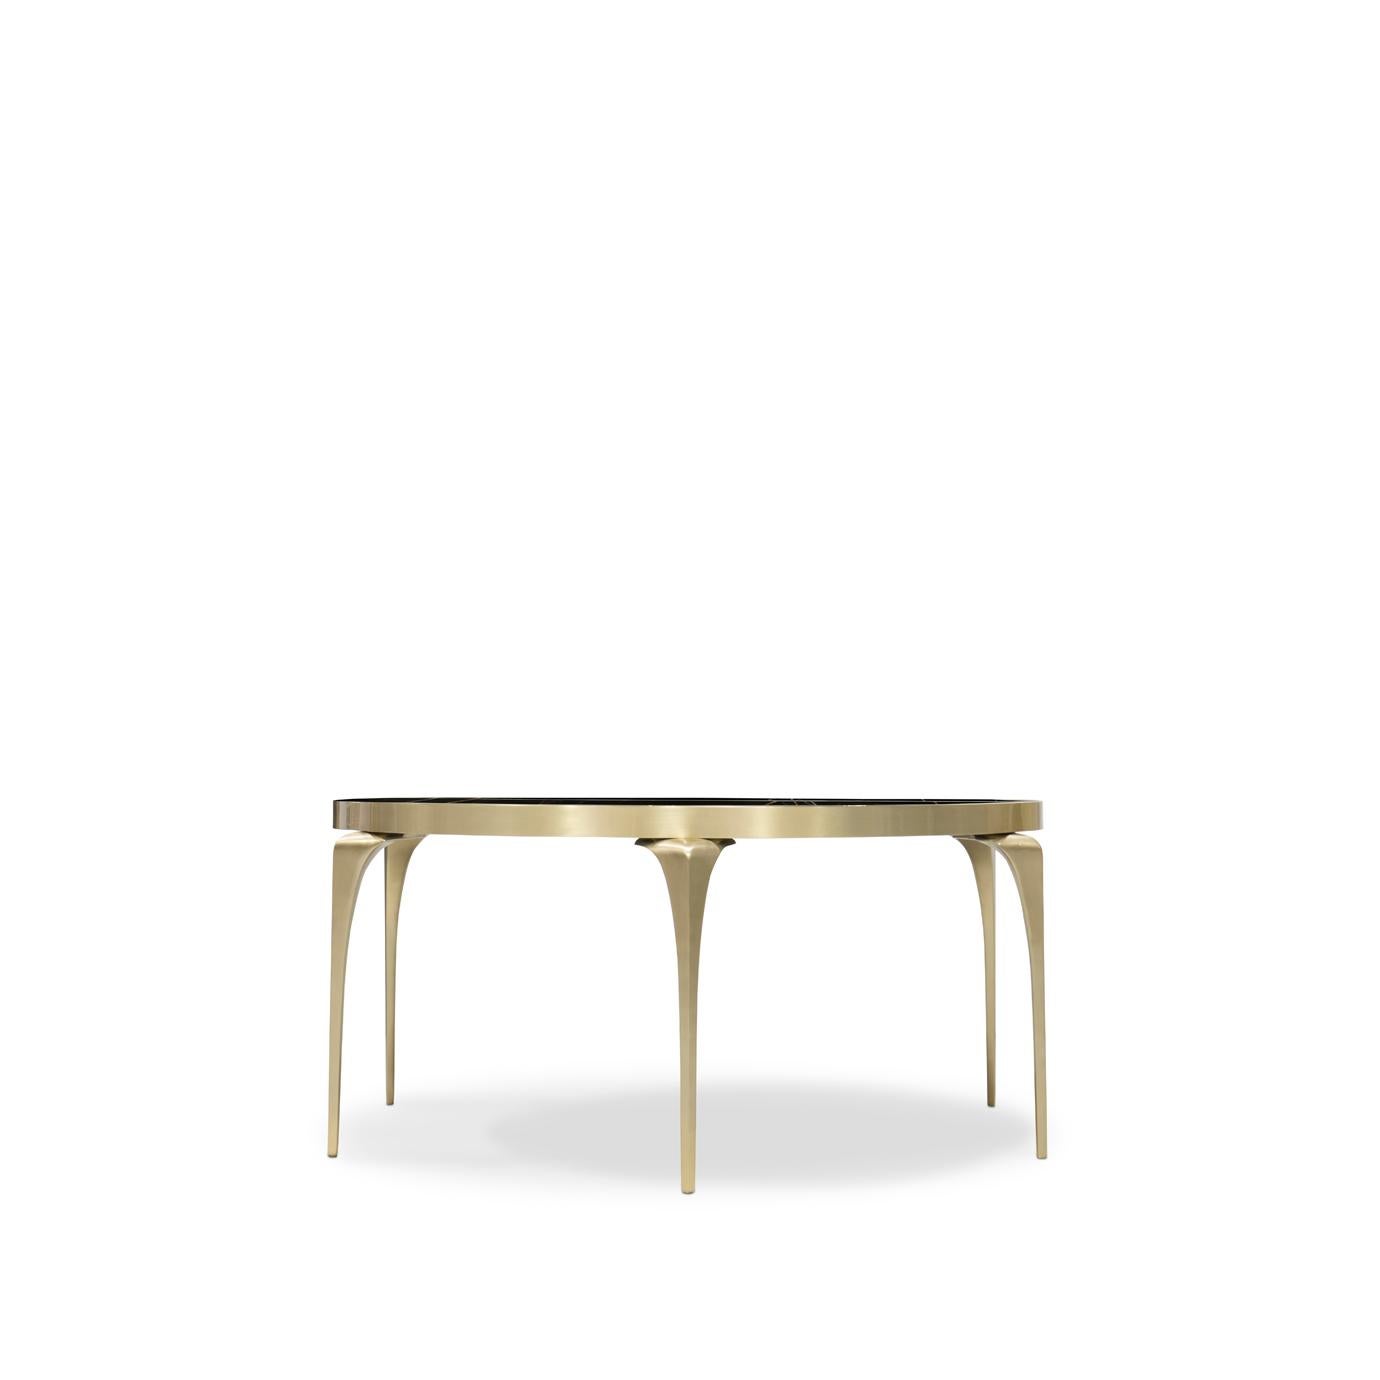 With its lux, polished black Sahara Noir marble top and satin brass legs the Rita Cocktail Table embody a sophisticated chic style. Simple yet modish, Rita is sure to bring a refined elegance to any room.